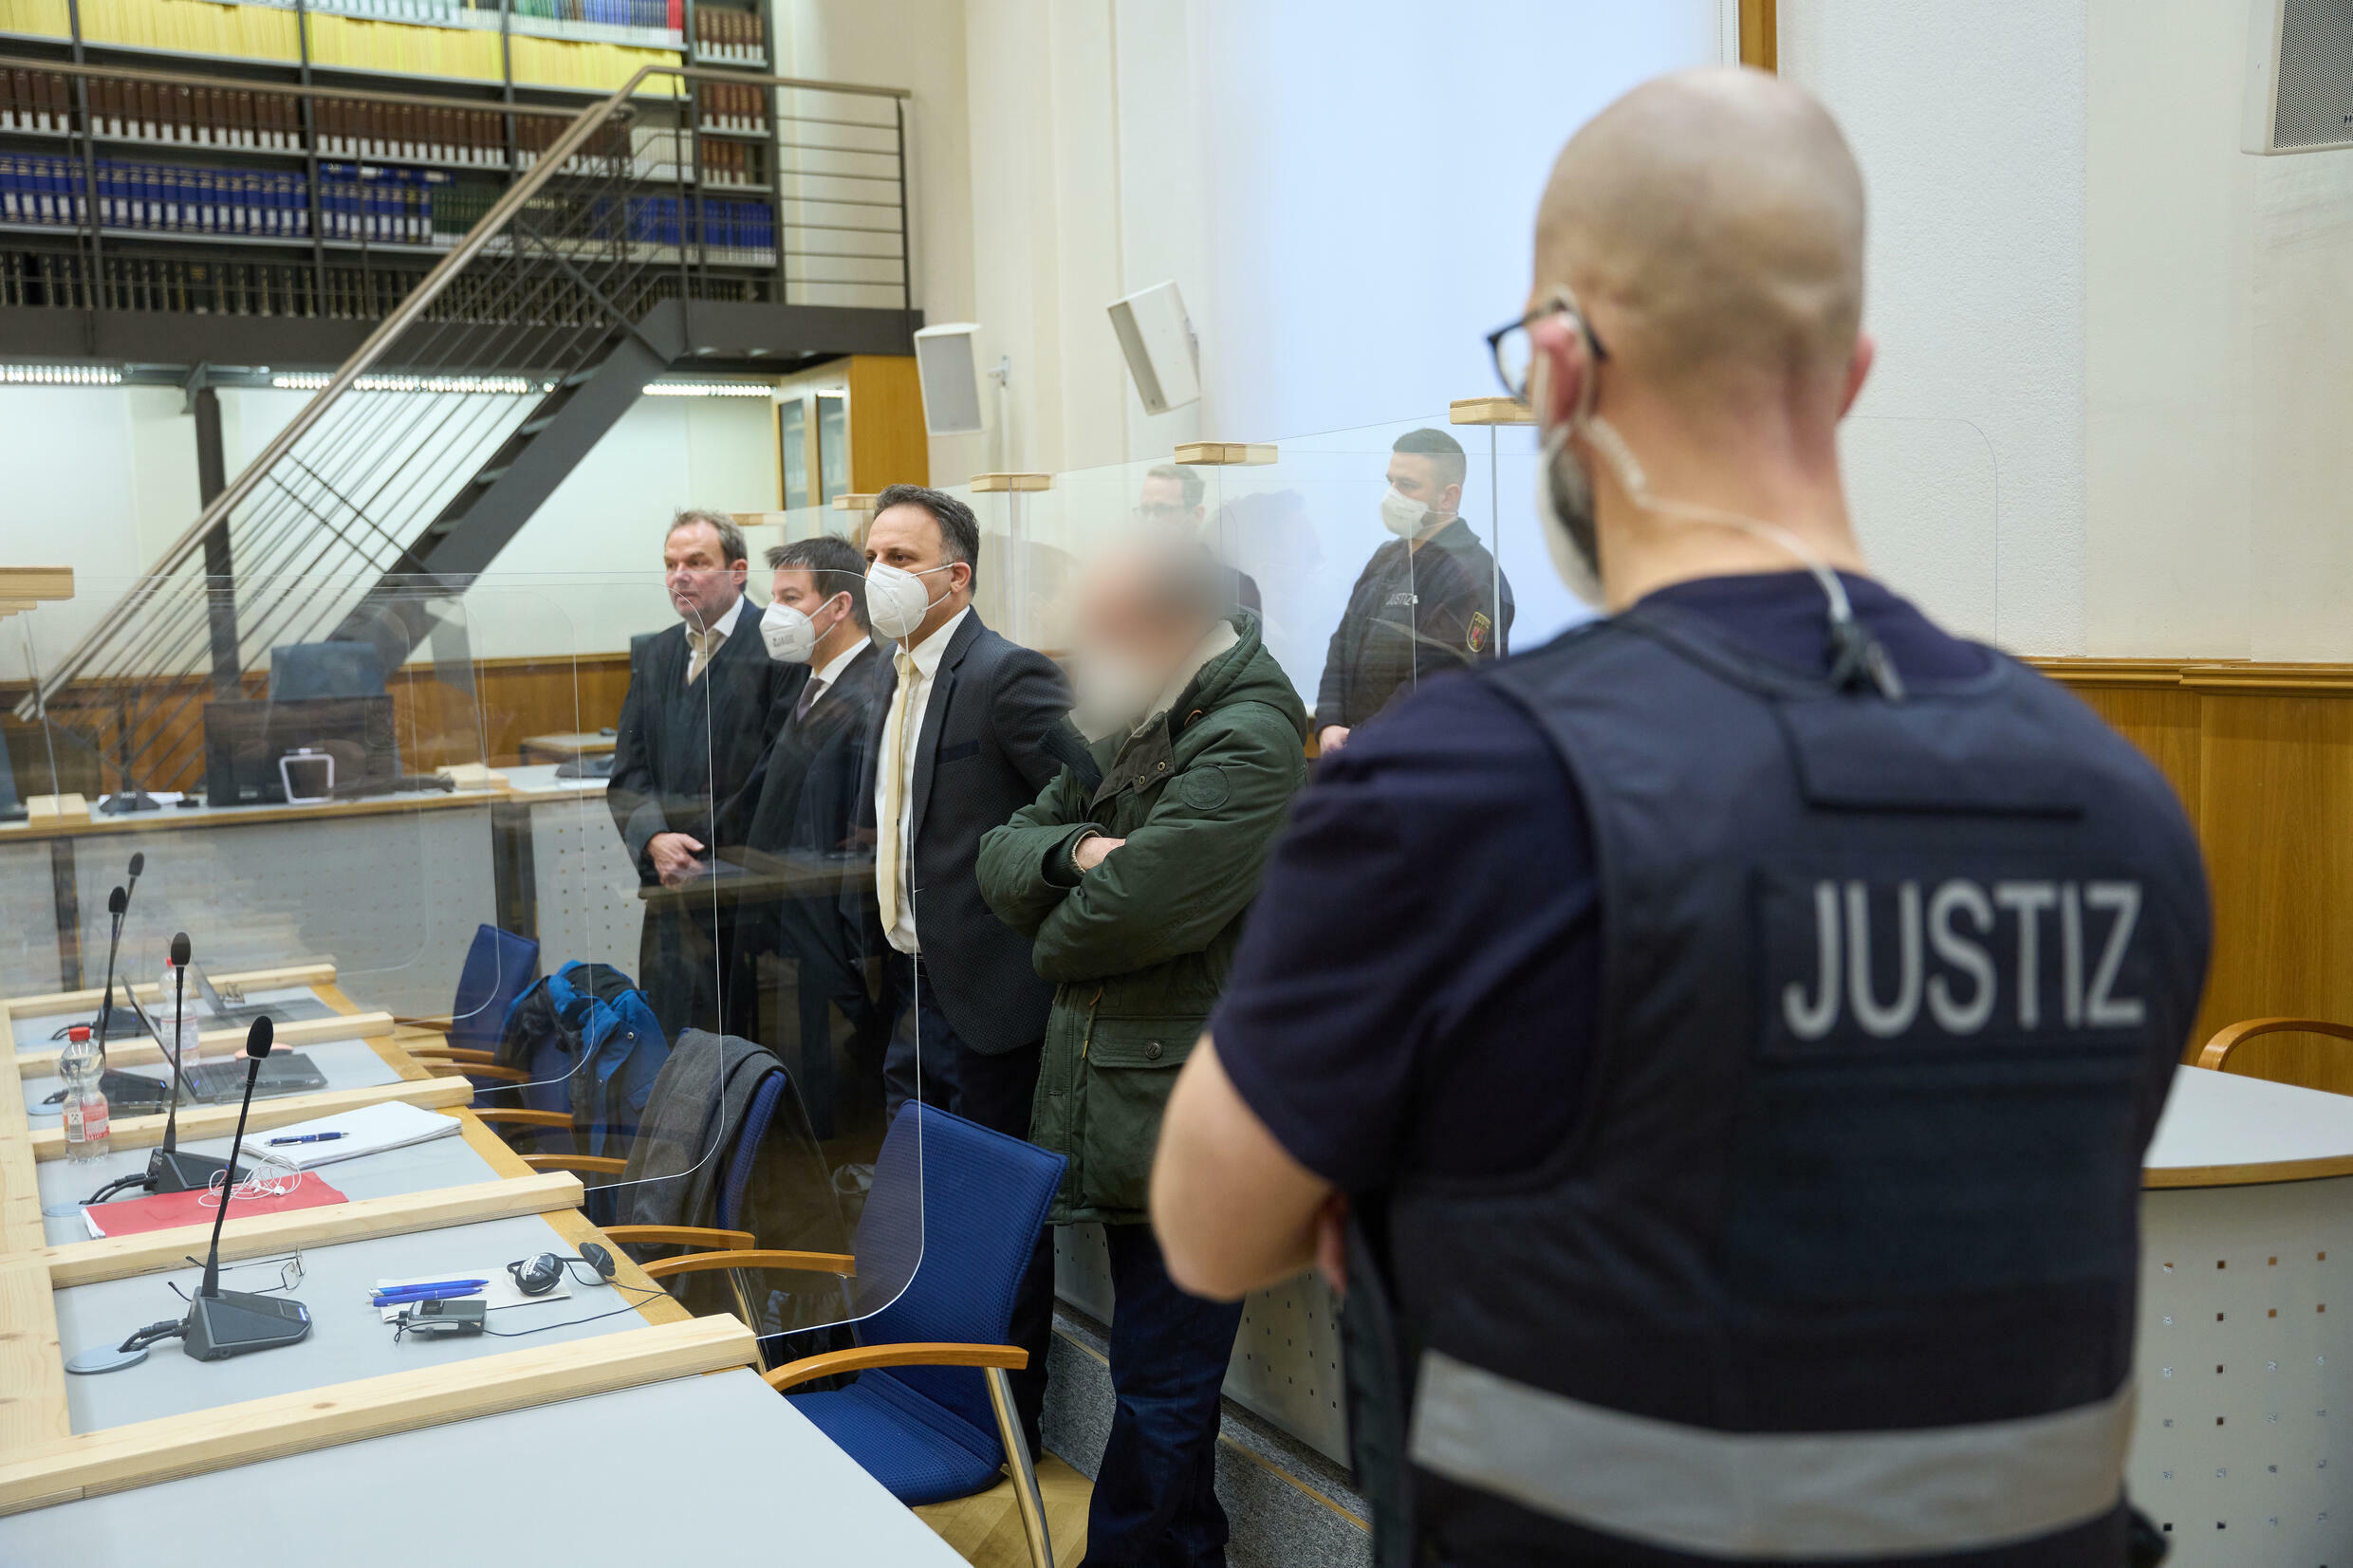 The defendant, former Syrian intelligence officer Anwar Raslan (C), is pictured in the courtroom at a courthouse in Koblenz, western Germany, on January 13, 2022 on the last day of his trial where he was sentenced to life in jail for crimes against humanity in the first global trial over state-sponsored torture in Syria. - Anwar Raslan, 58, was found guilty of overseeing the murder of 27 people at the Al-Khatib detention centre in Damascus, also known as "Branch 251", in 2011 and 2012. At the request of the German court, the face of the defendant was made unrecognisable.